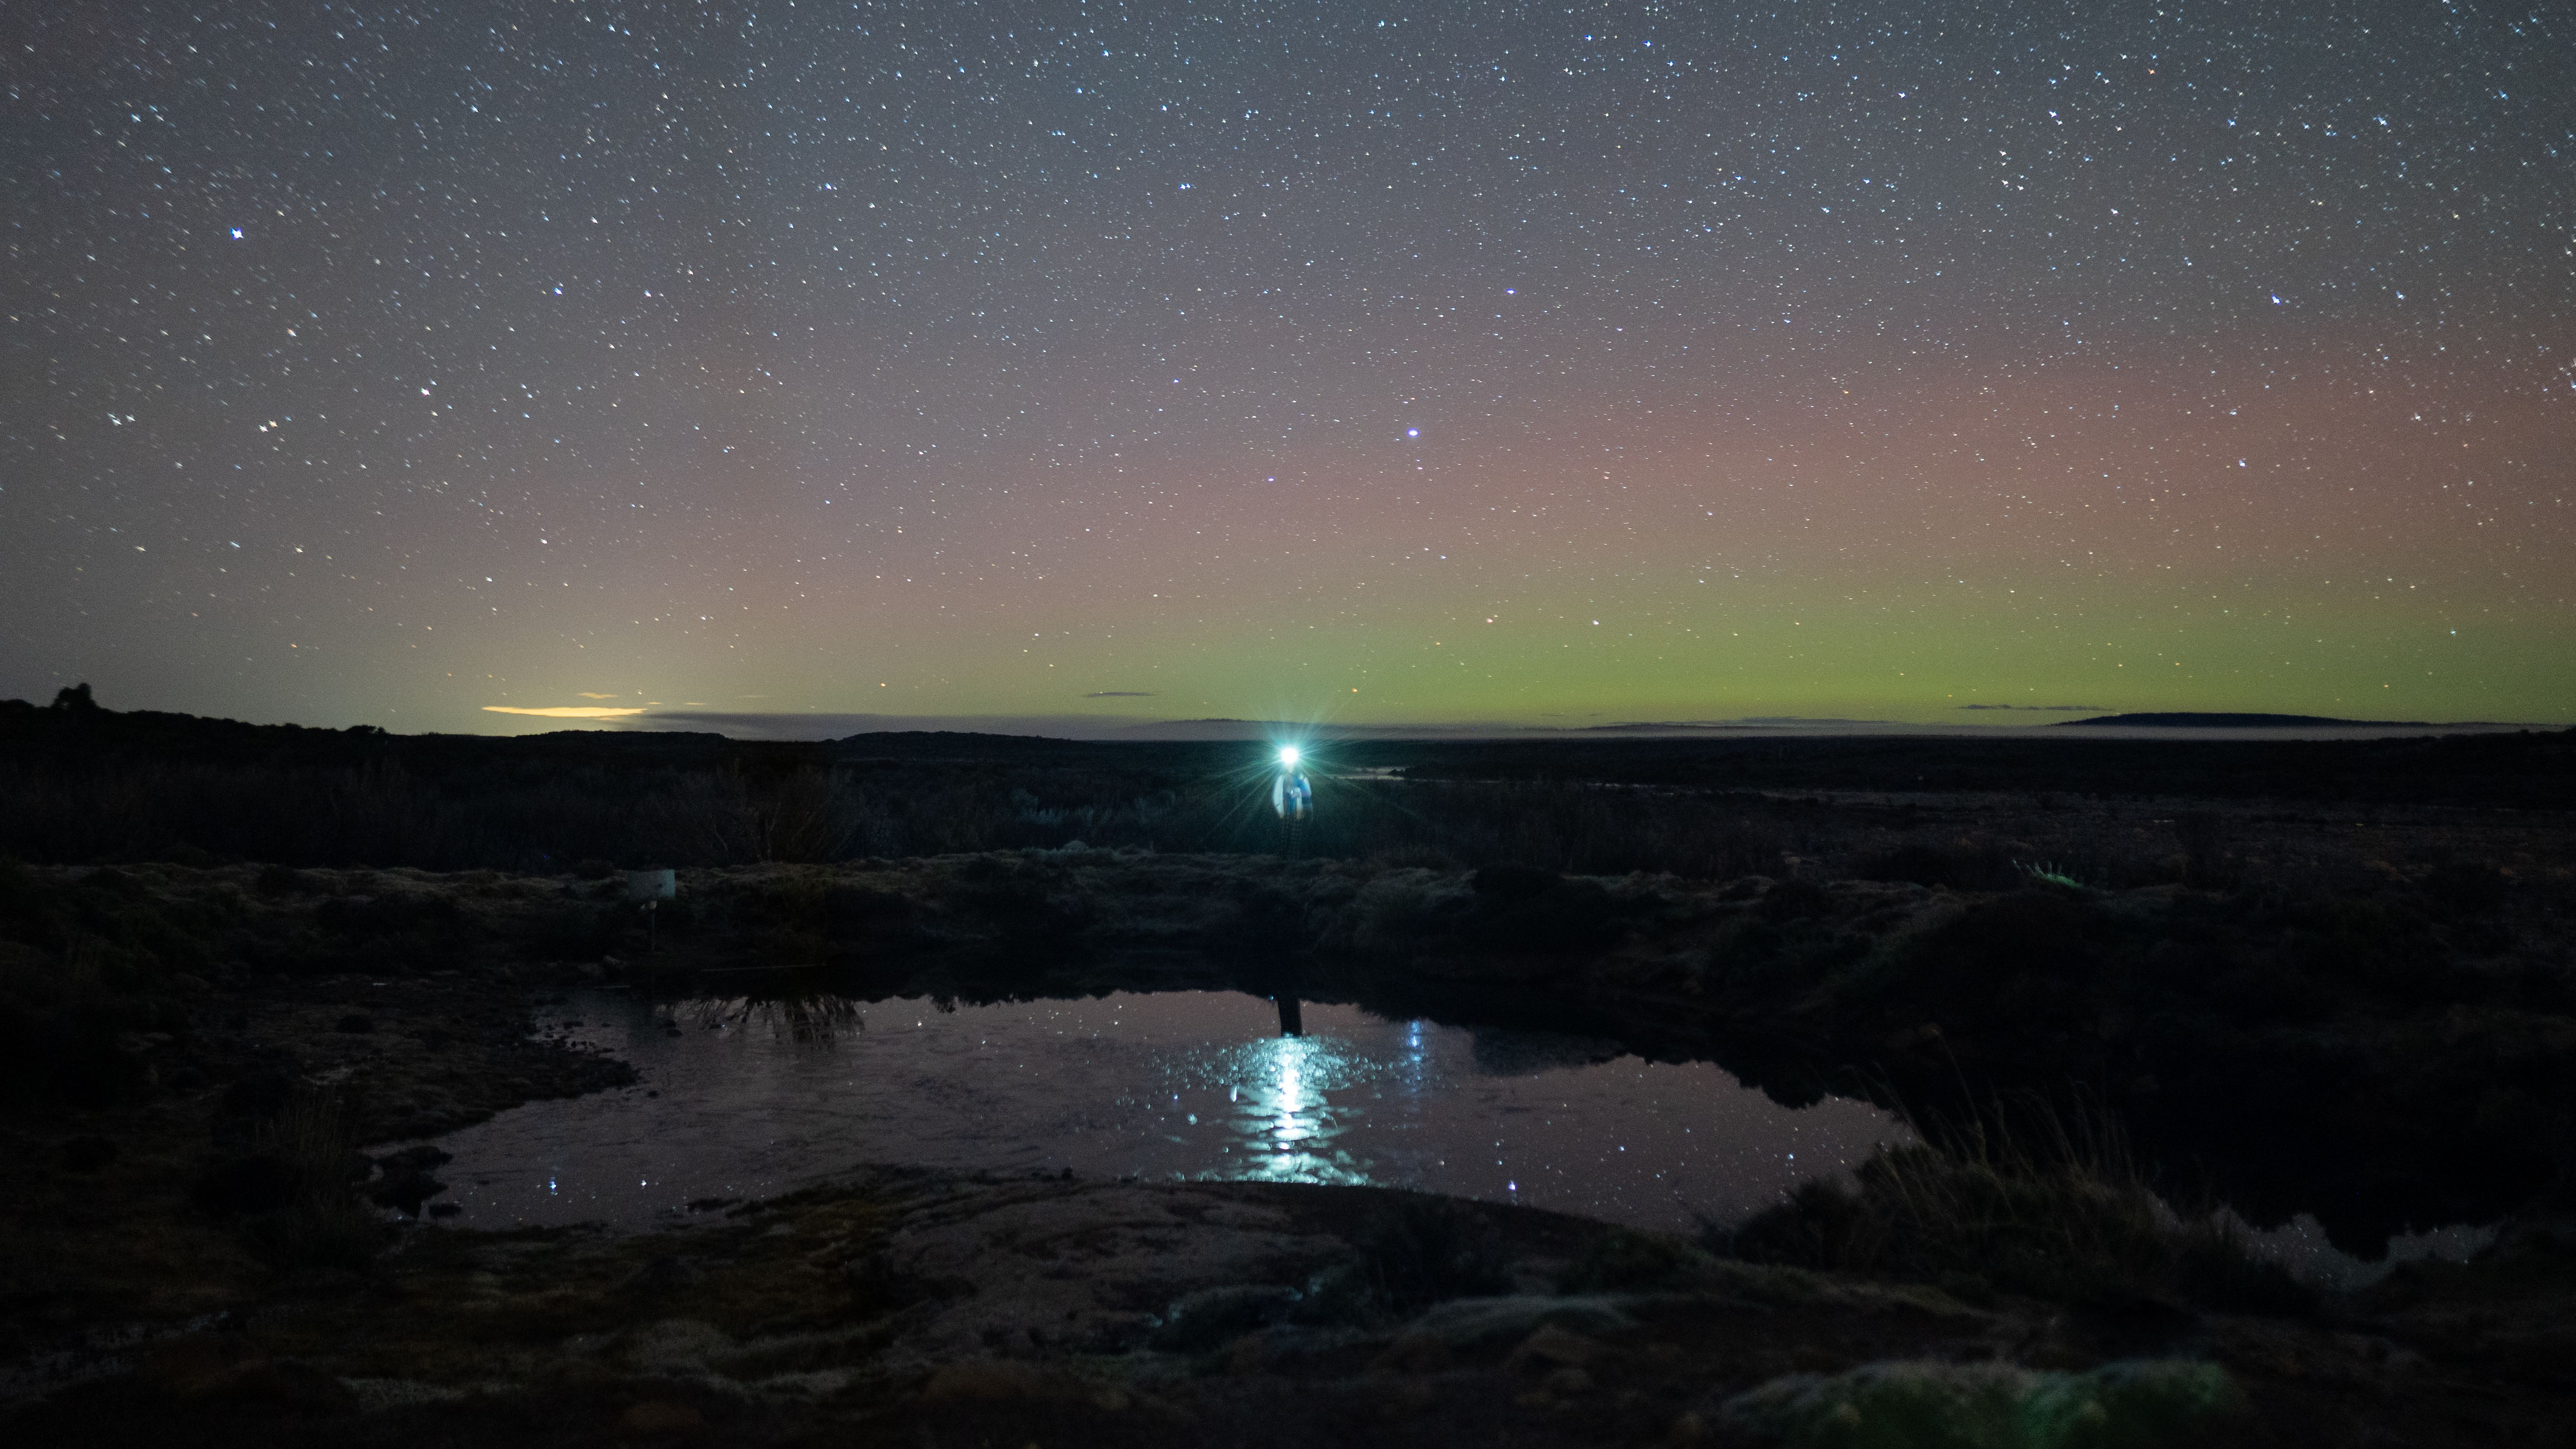 Person with a head torch shinning at the camera with the Aurora Australis lighting up the night sky green and pink.